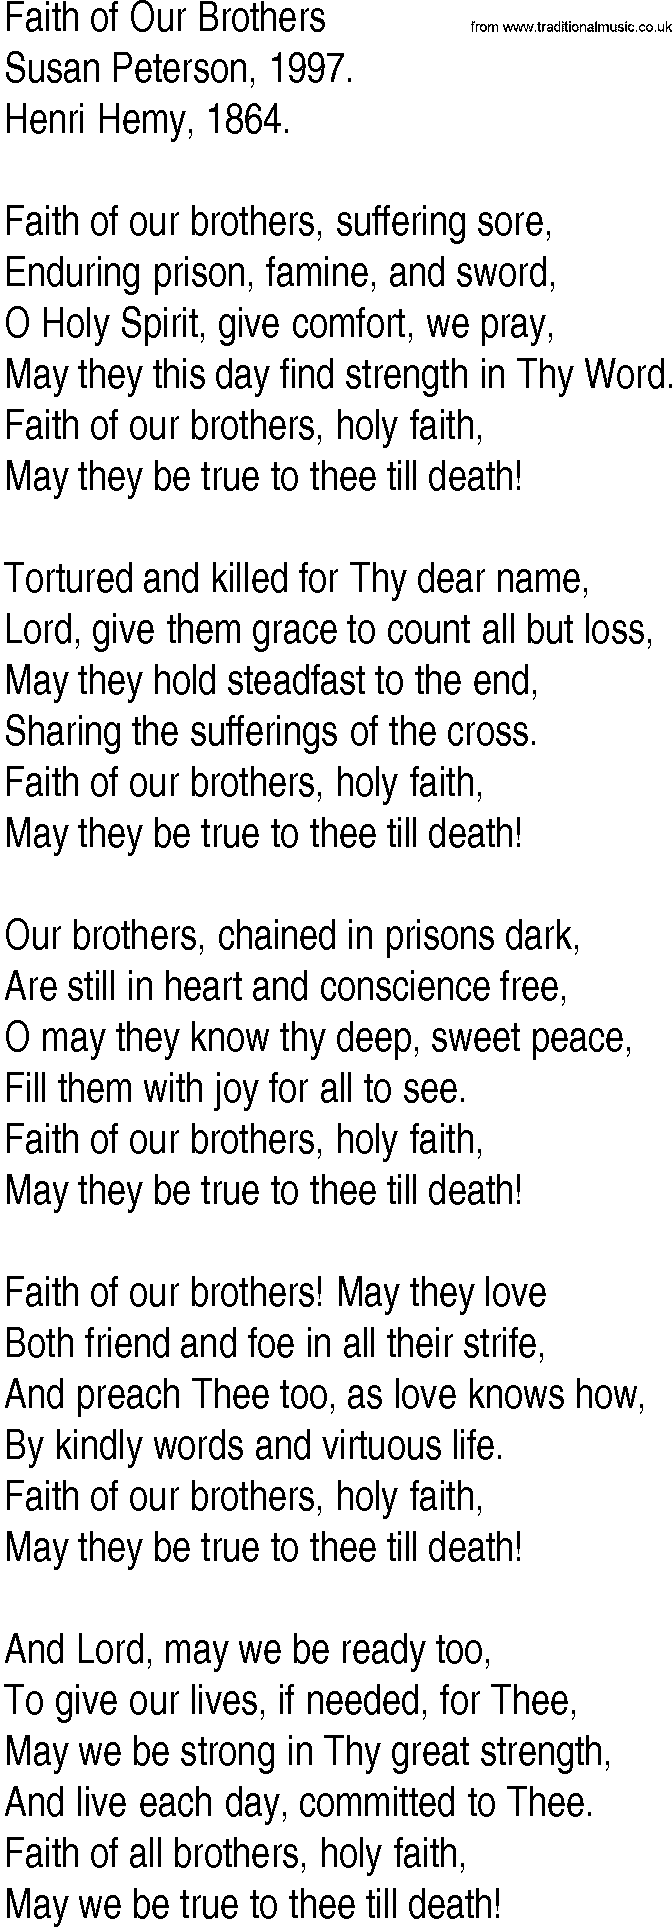 Hymn and Gospel Song: Faith of Our Brothers by Susan Peterson lyrics